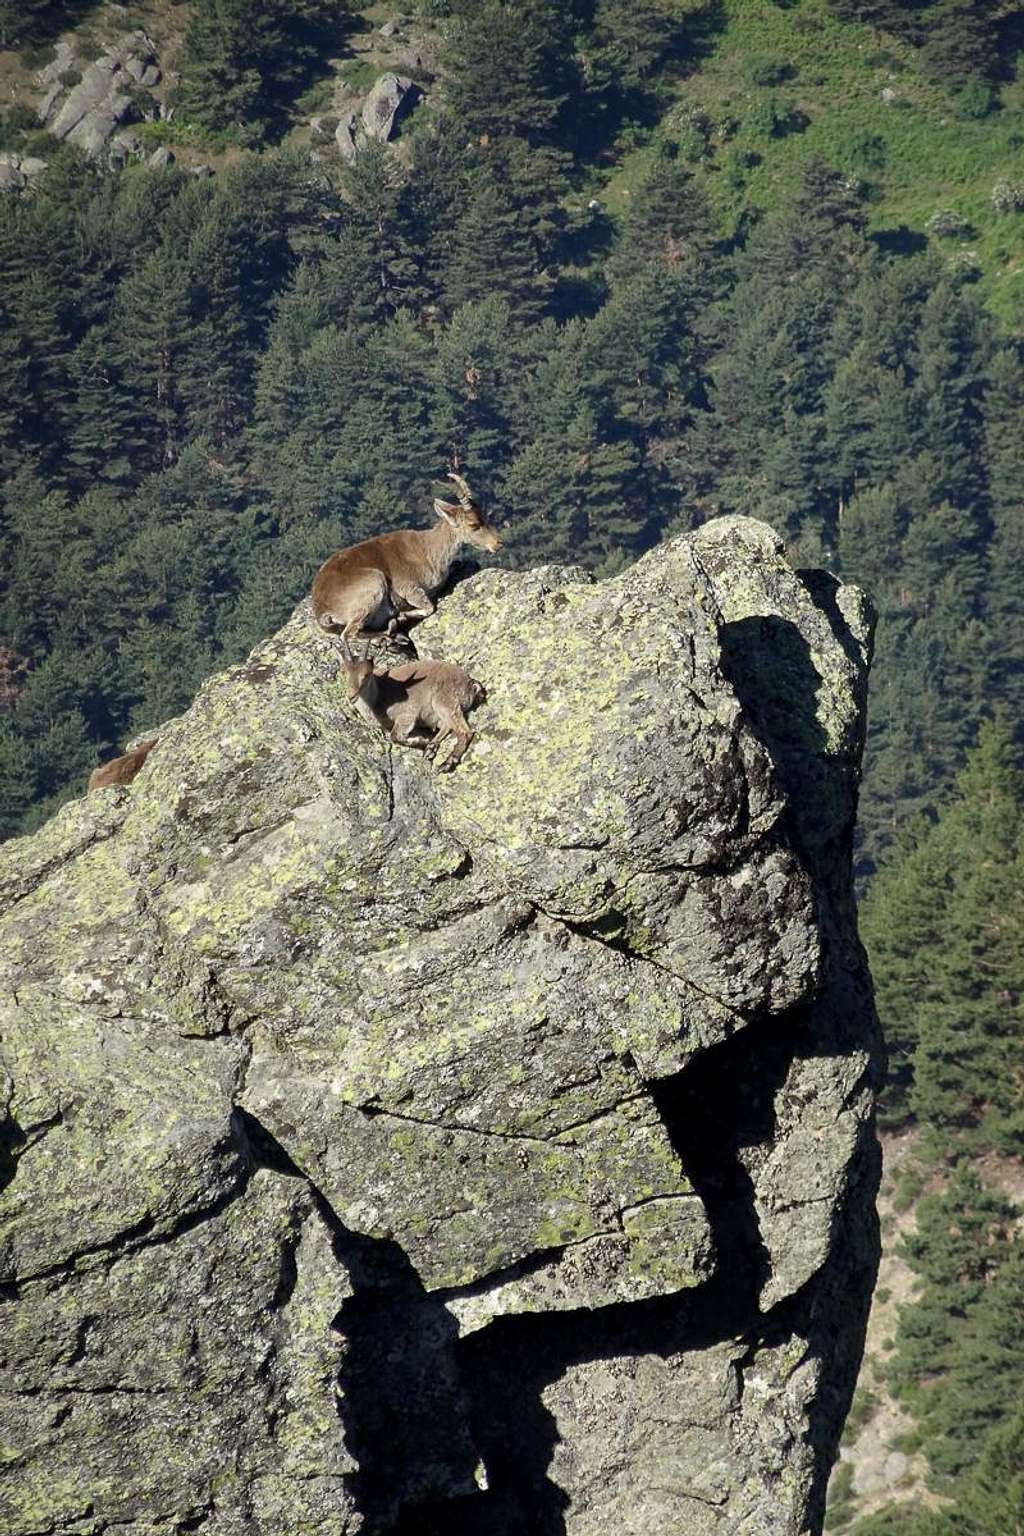 The perfect place to rest an ibex